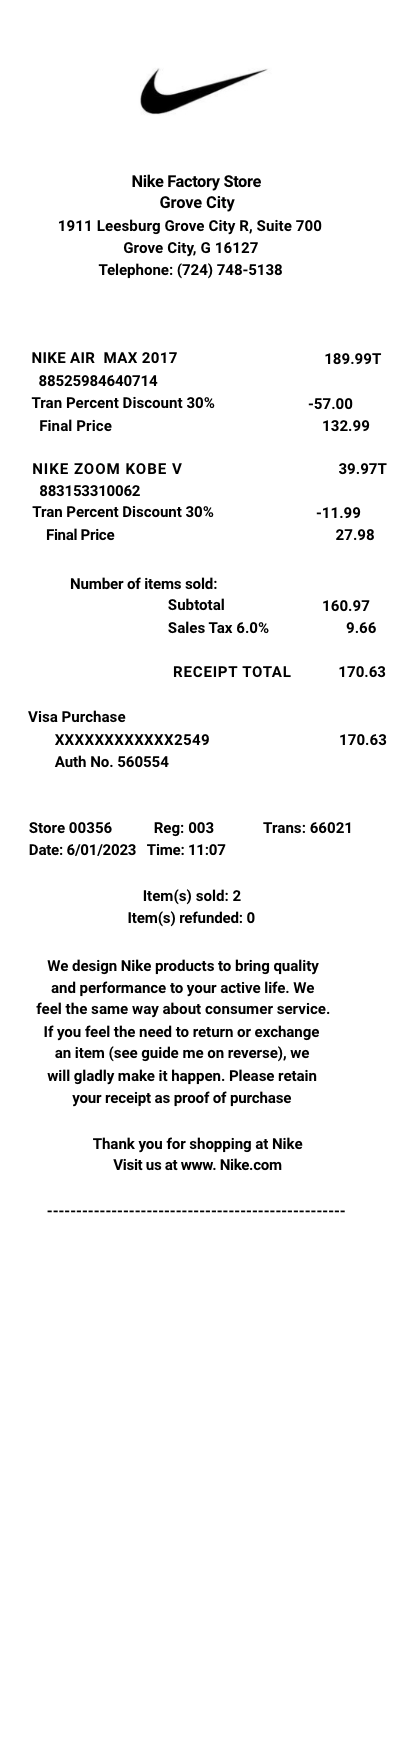 Nike Factory Store receipt template